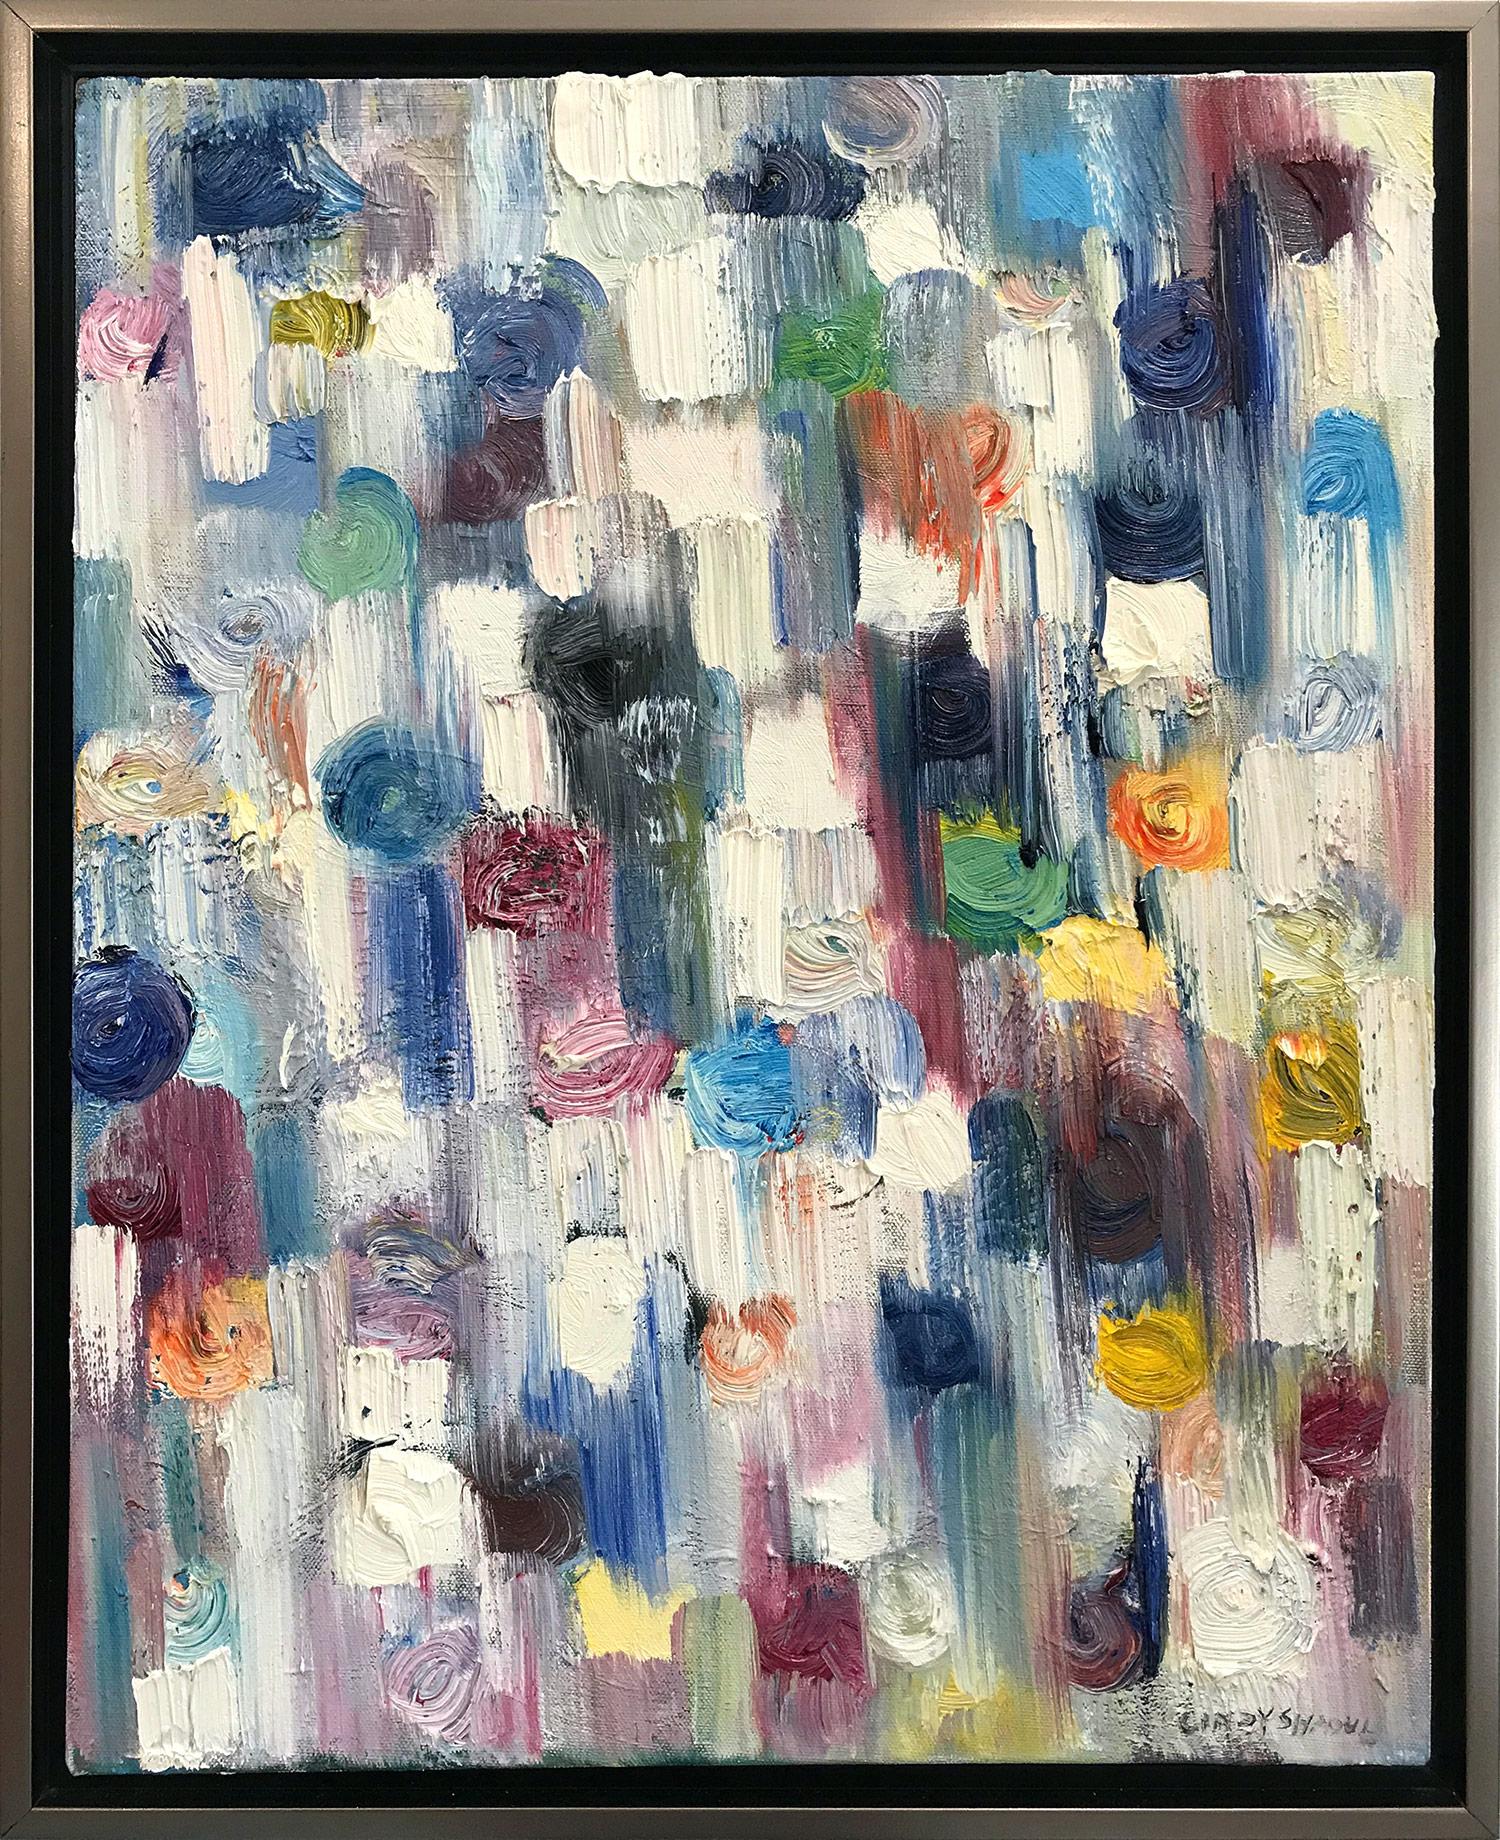 Cindy Shaoul Abstract Painting - "Dripping Dots - Champs-Élysées" Contemporary Colorful Oil Painting on Canvas